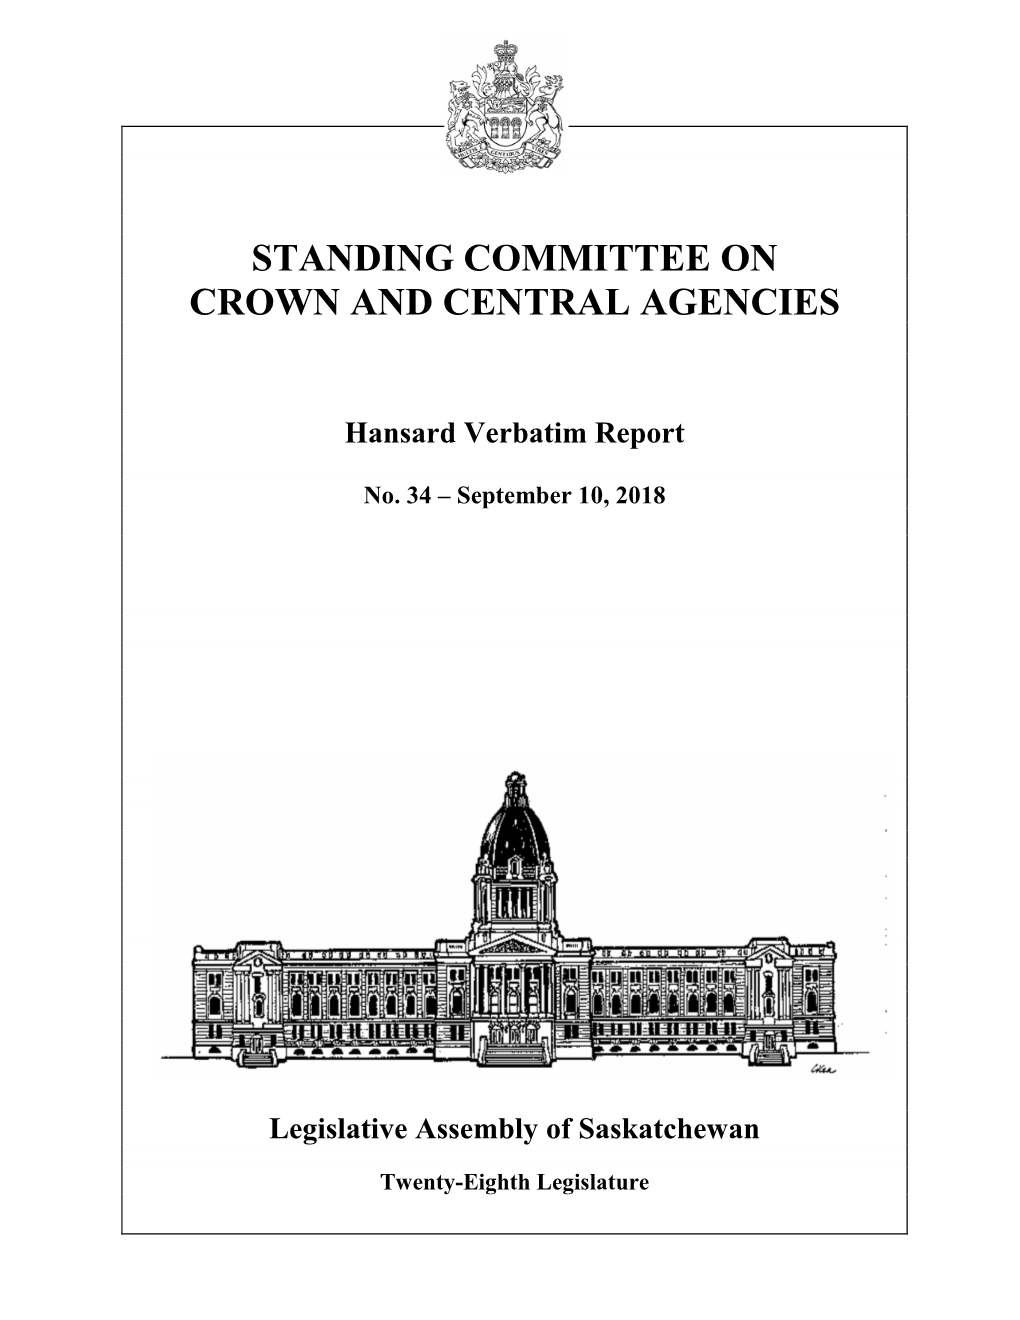 September 10, 2018 Crown and Central Agencies Committee 683